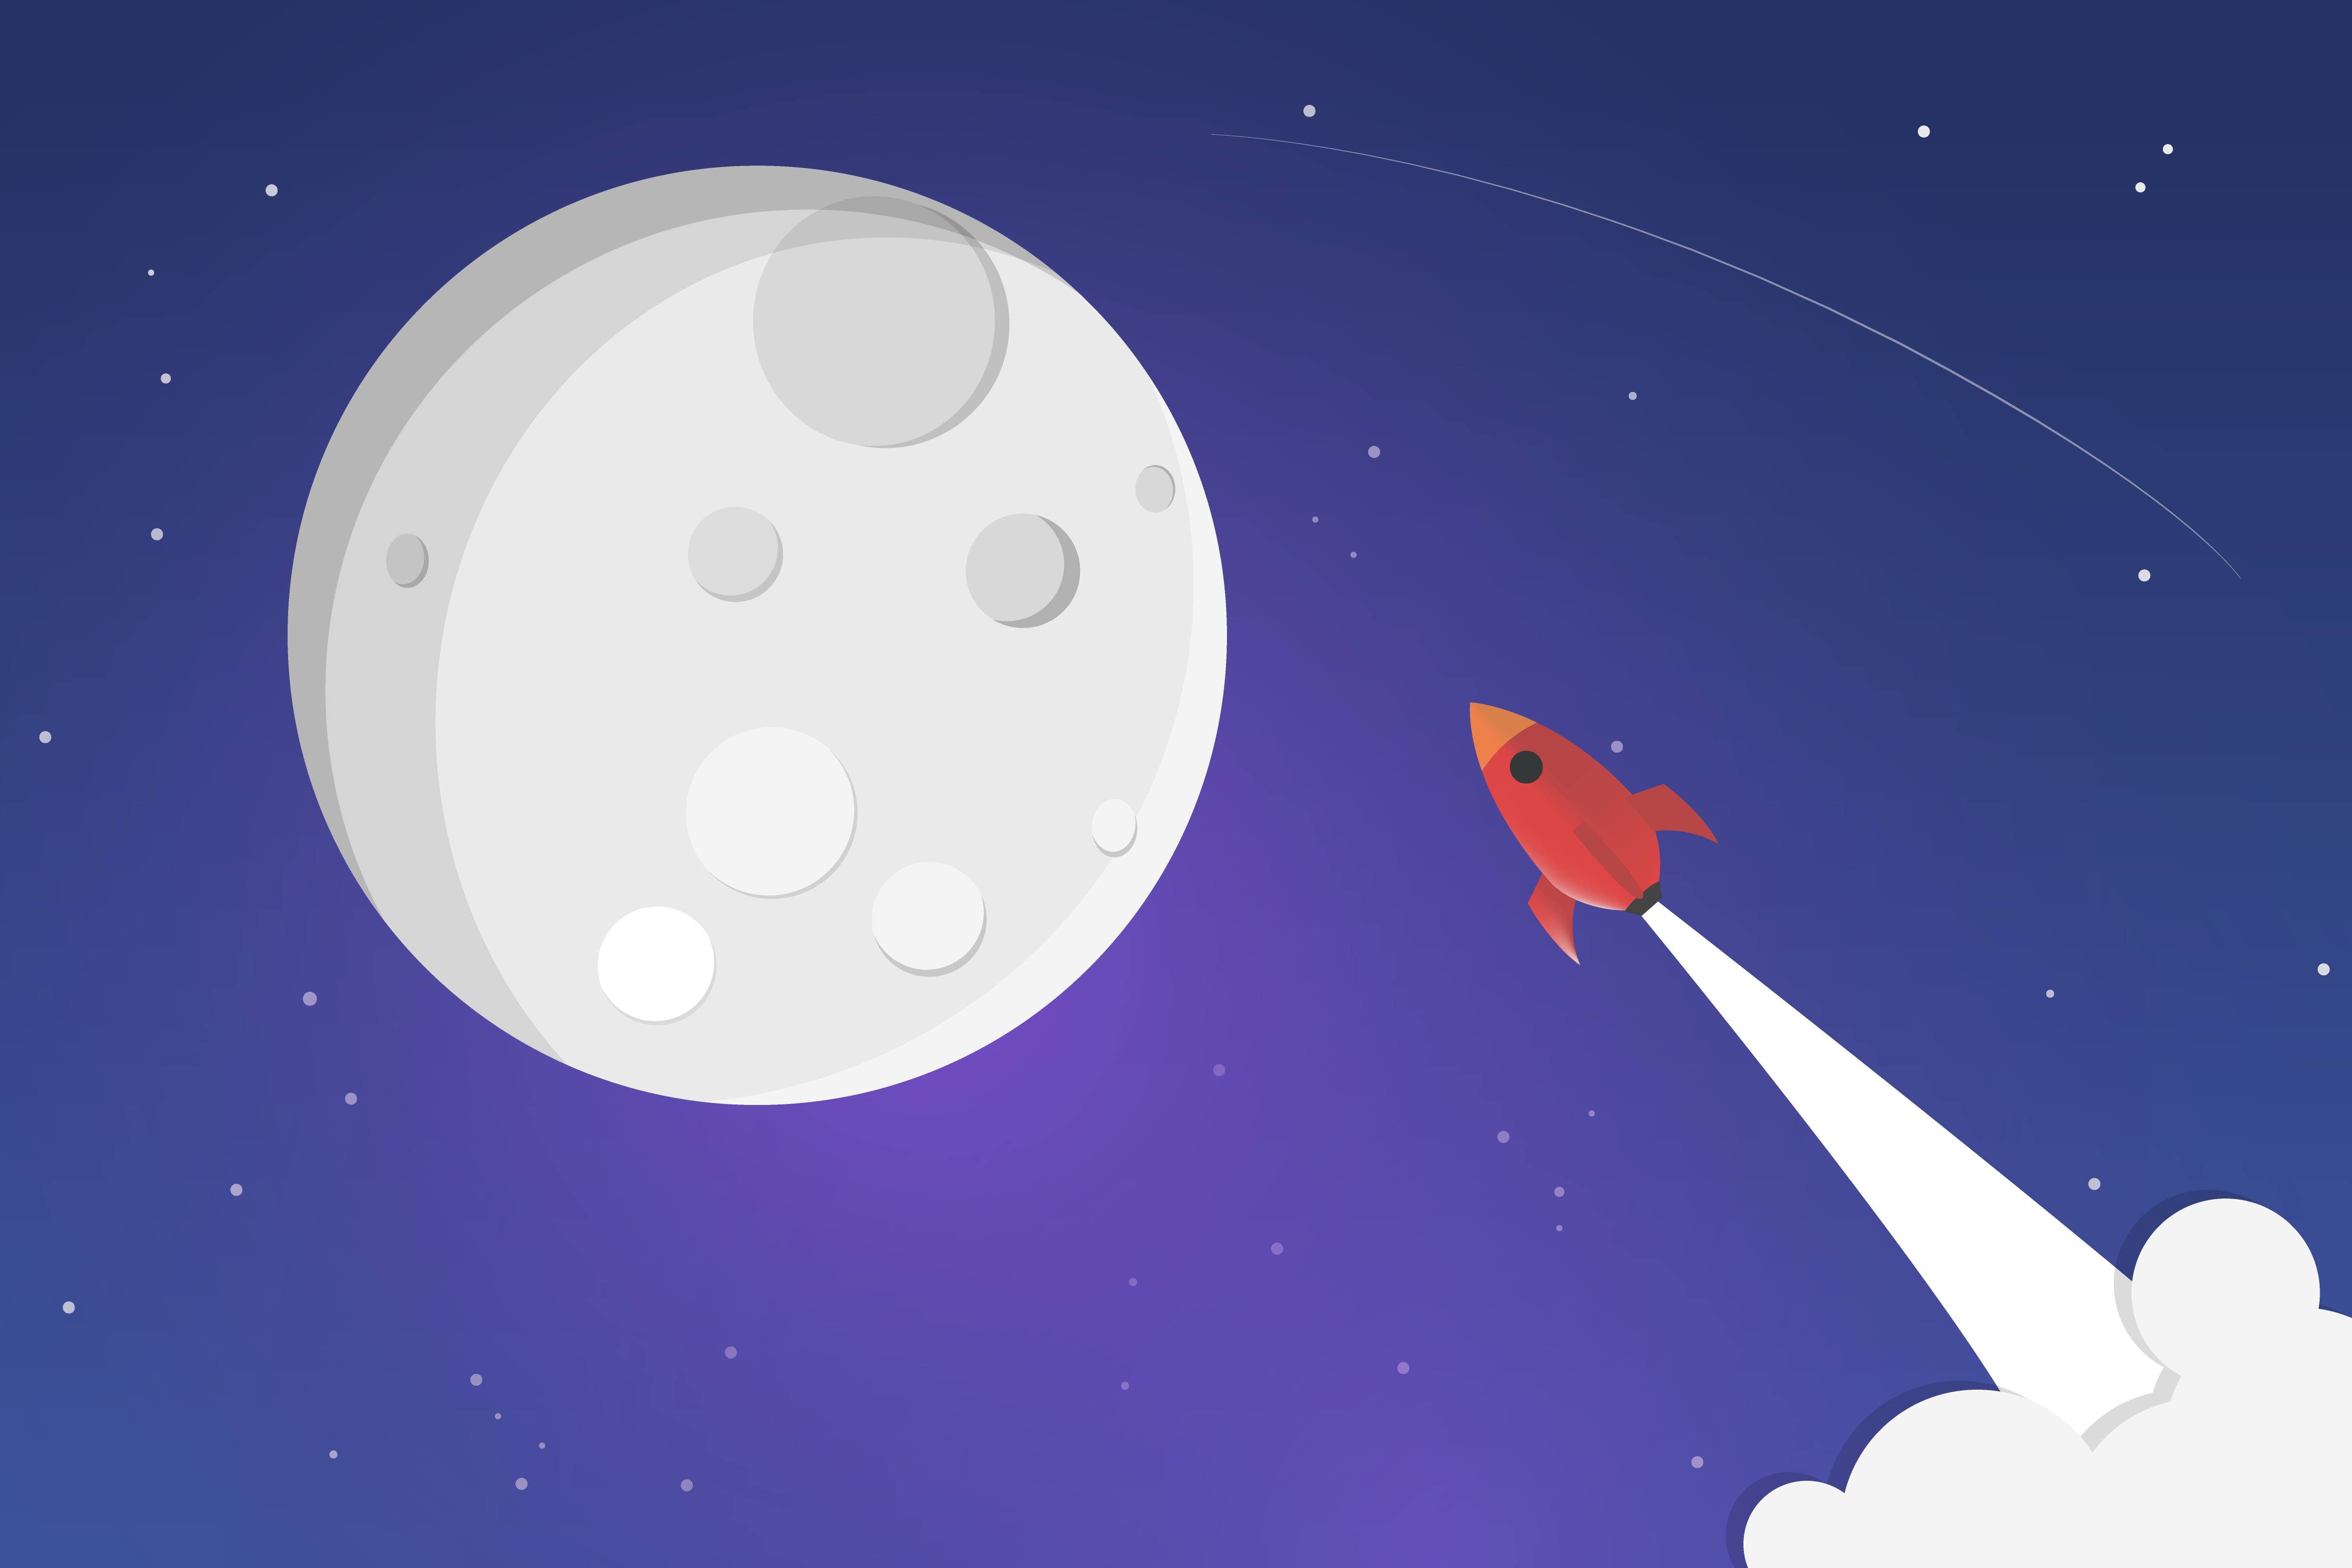 Dribbble - Rocket-Ship-to-Moon.png by Sarah Thomson